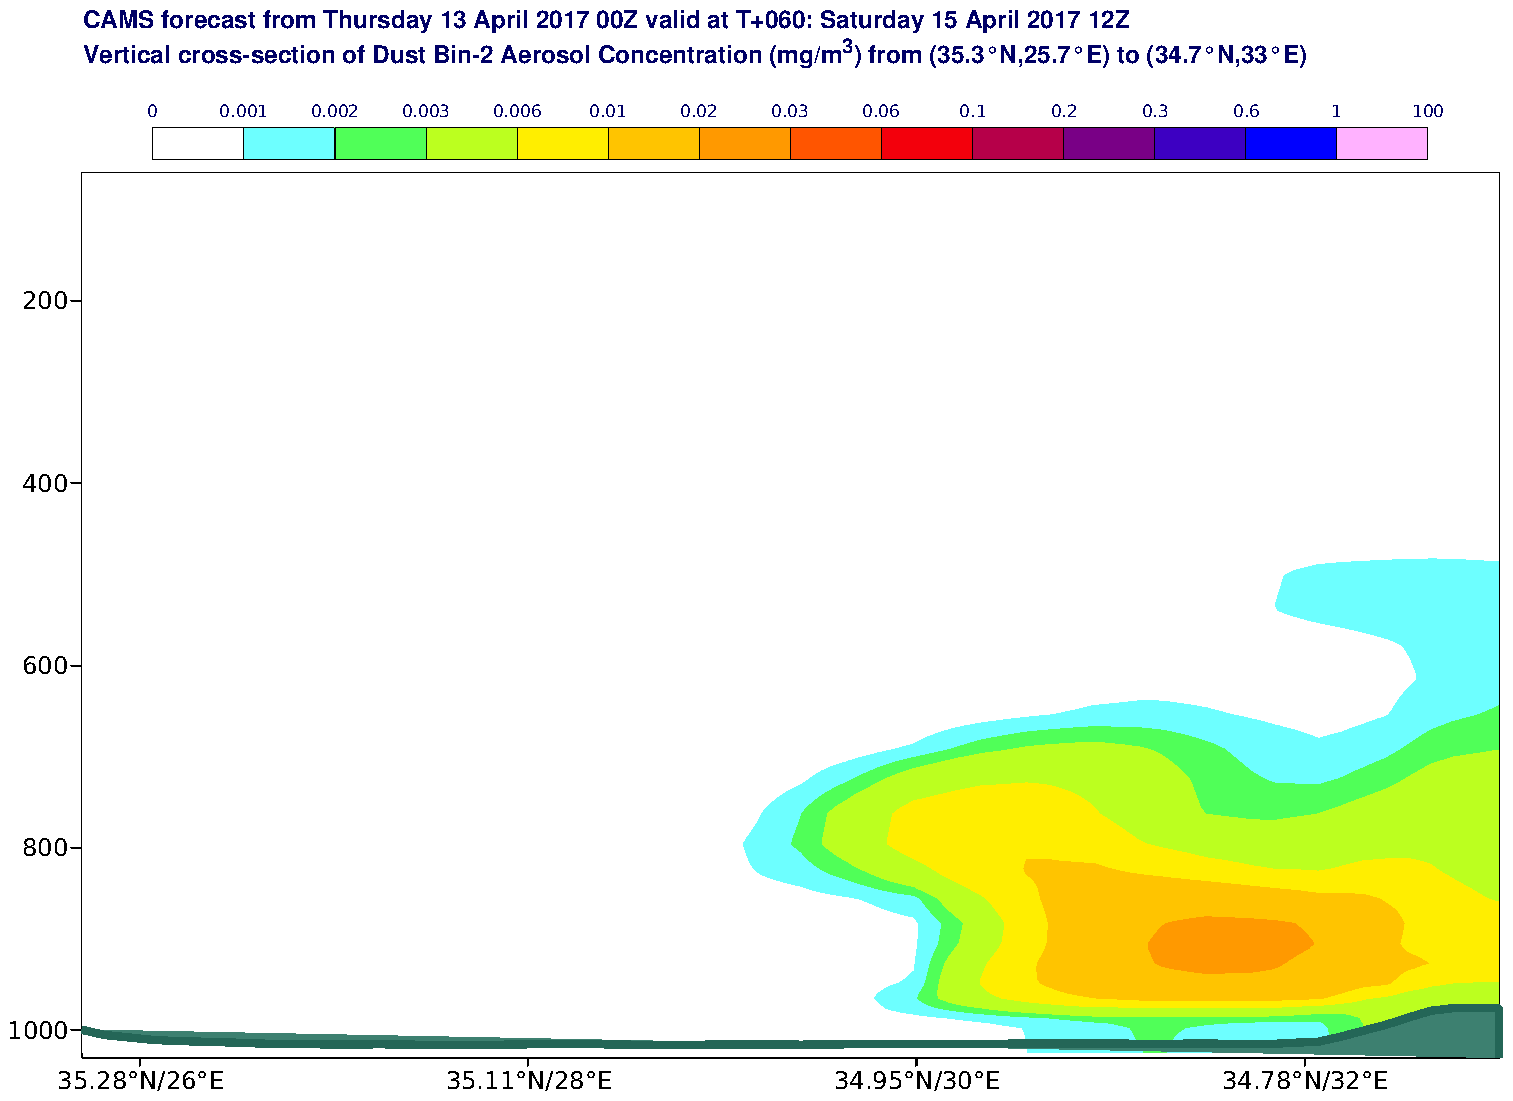 Vertical cross-section of Dust Bin-2 Aerosol Concentration (mg/m3) valid at T60 - 2017-04-15 12:00